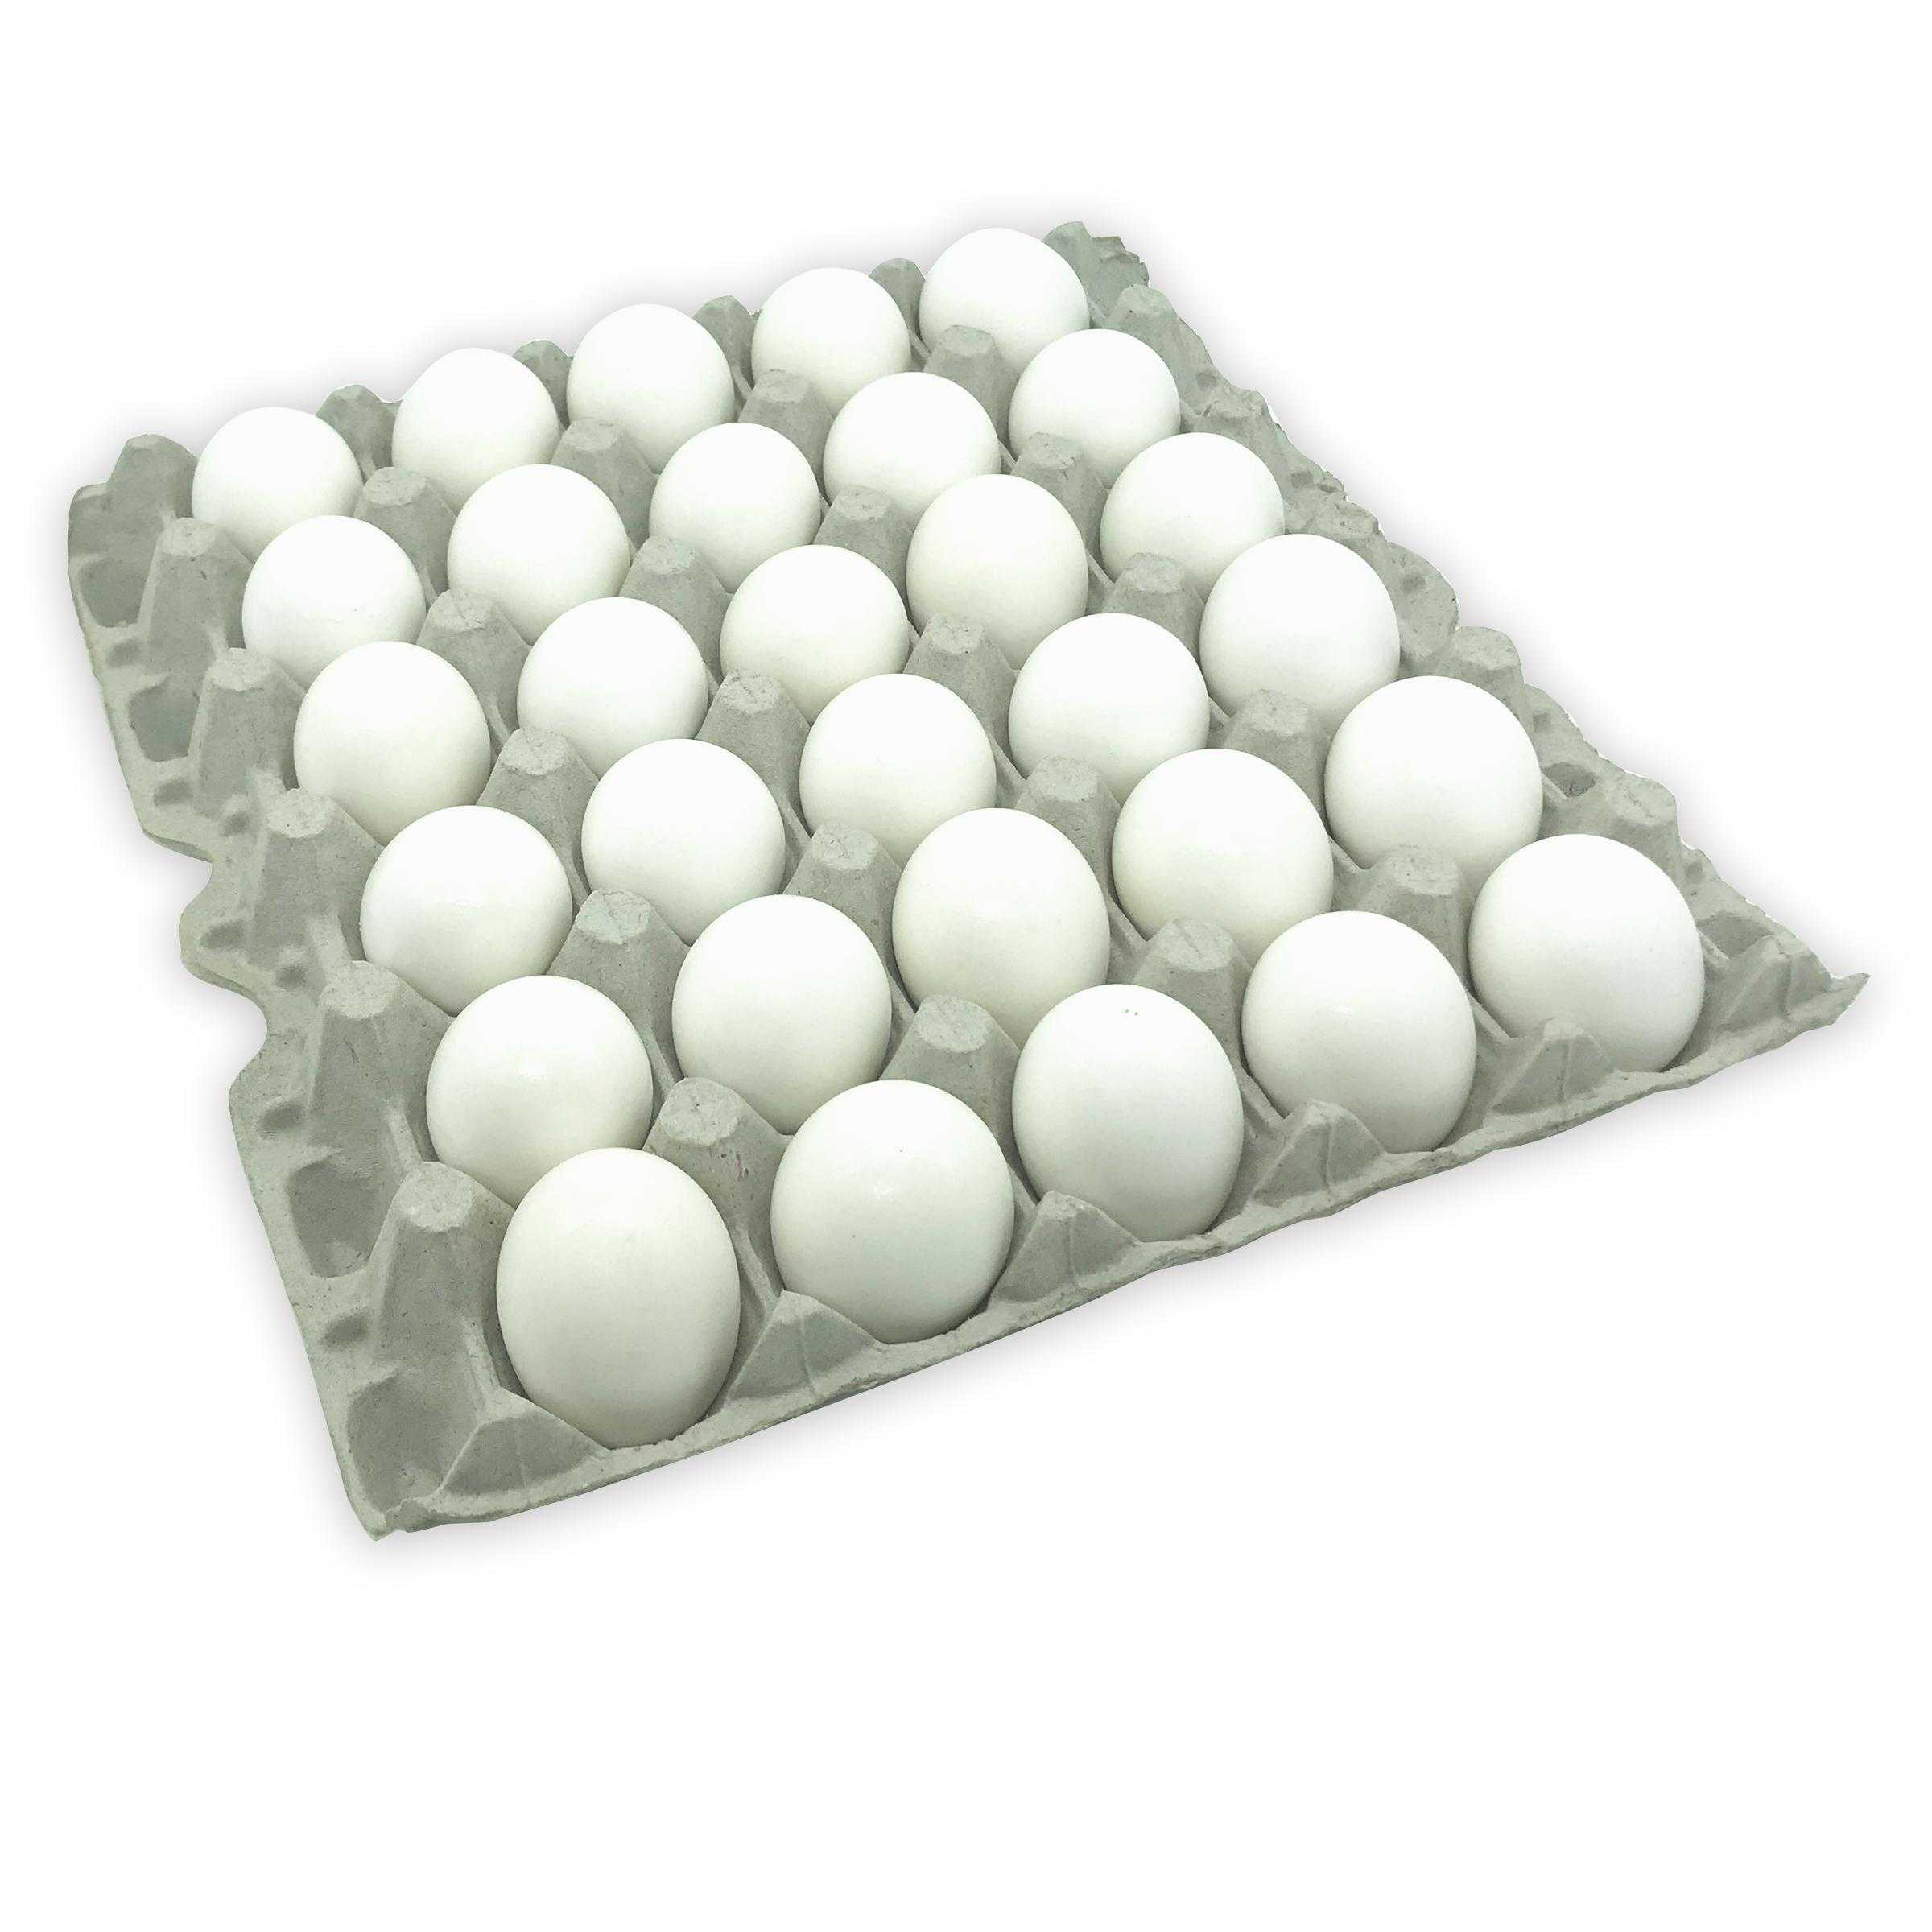 Abbotsford Farms® American Humane Certified Cage Free Hard Cooked Shell On Eggs, 1/7.5 Dozen